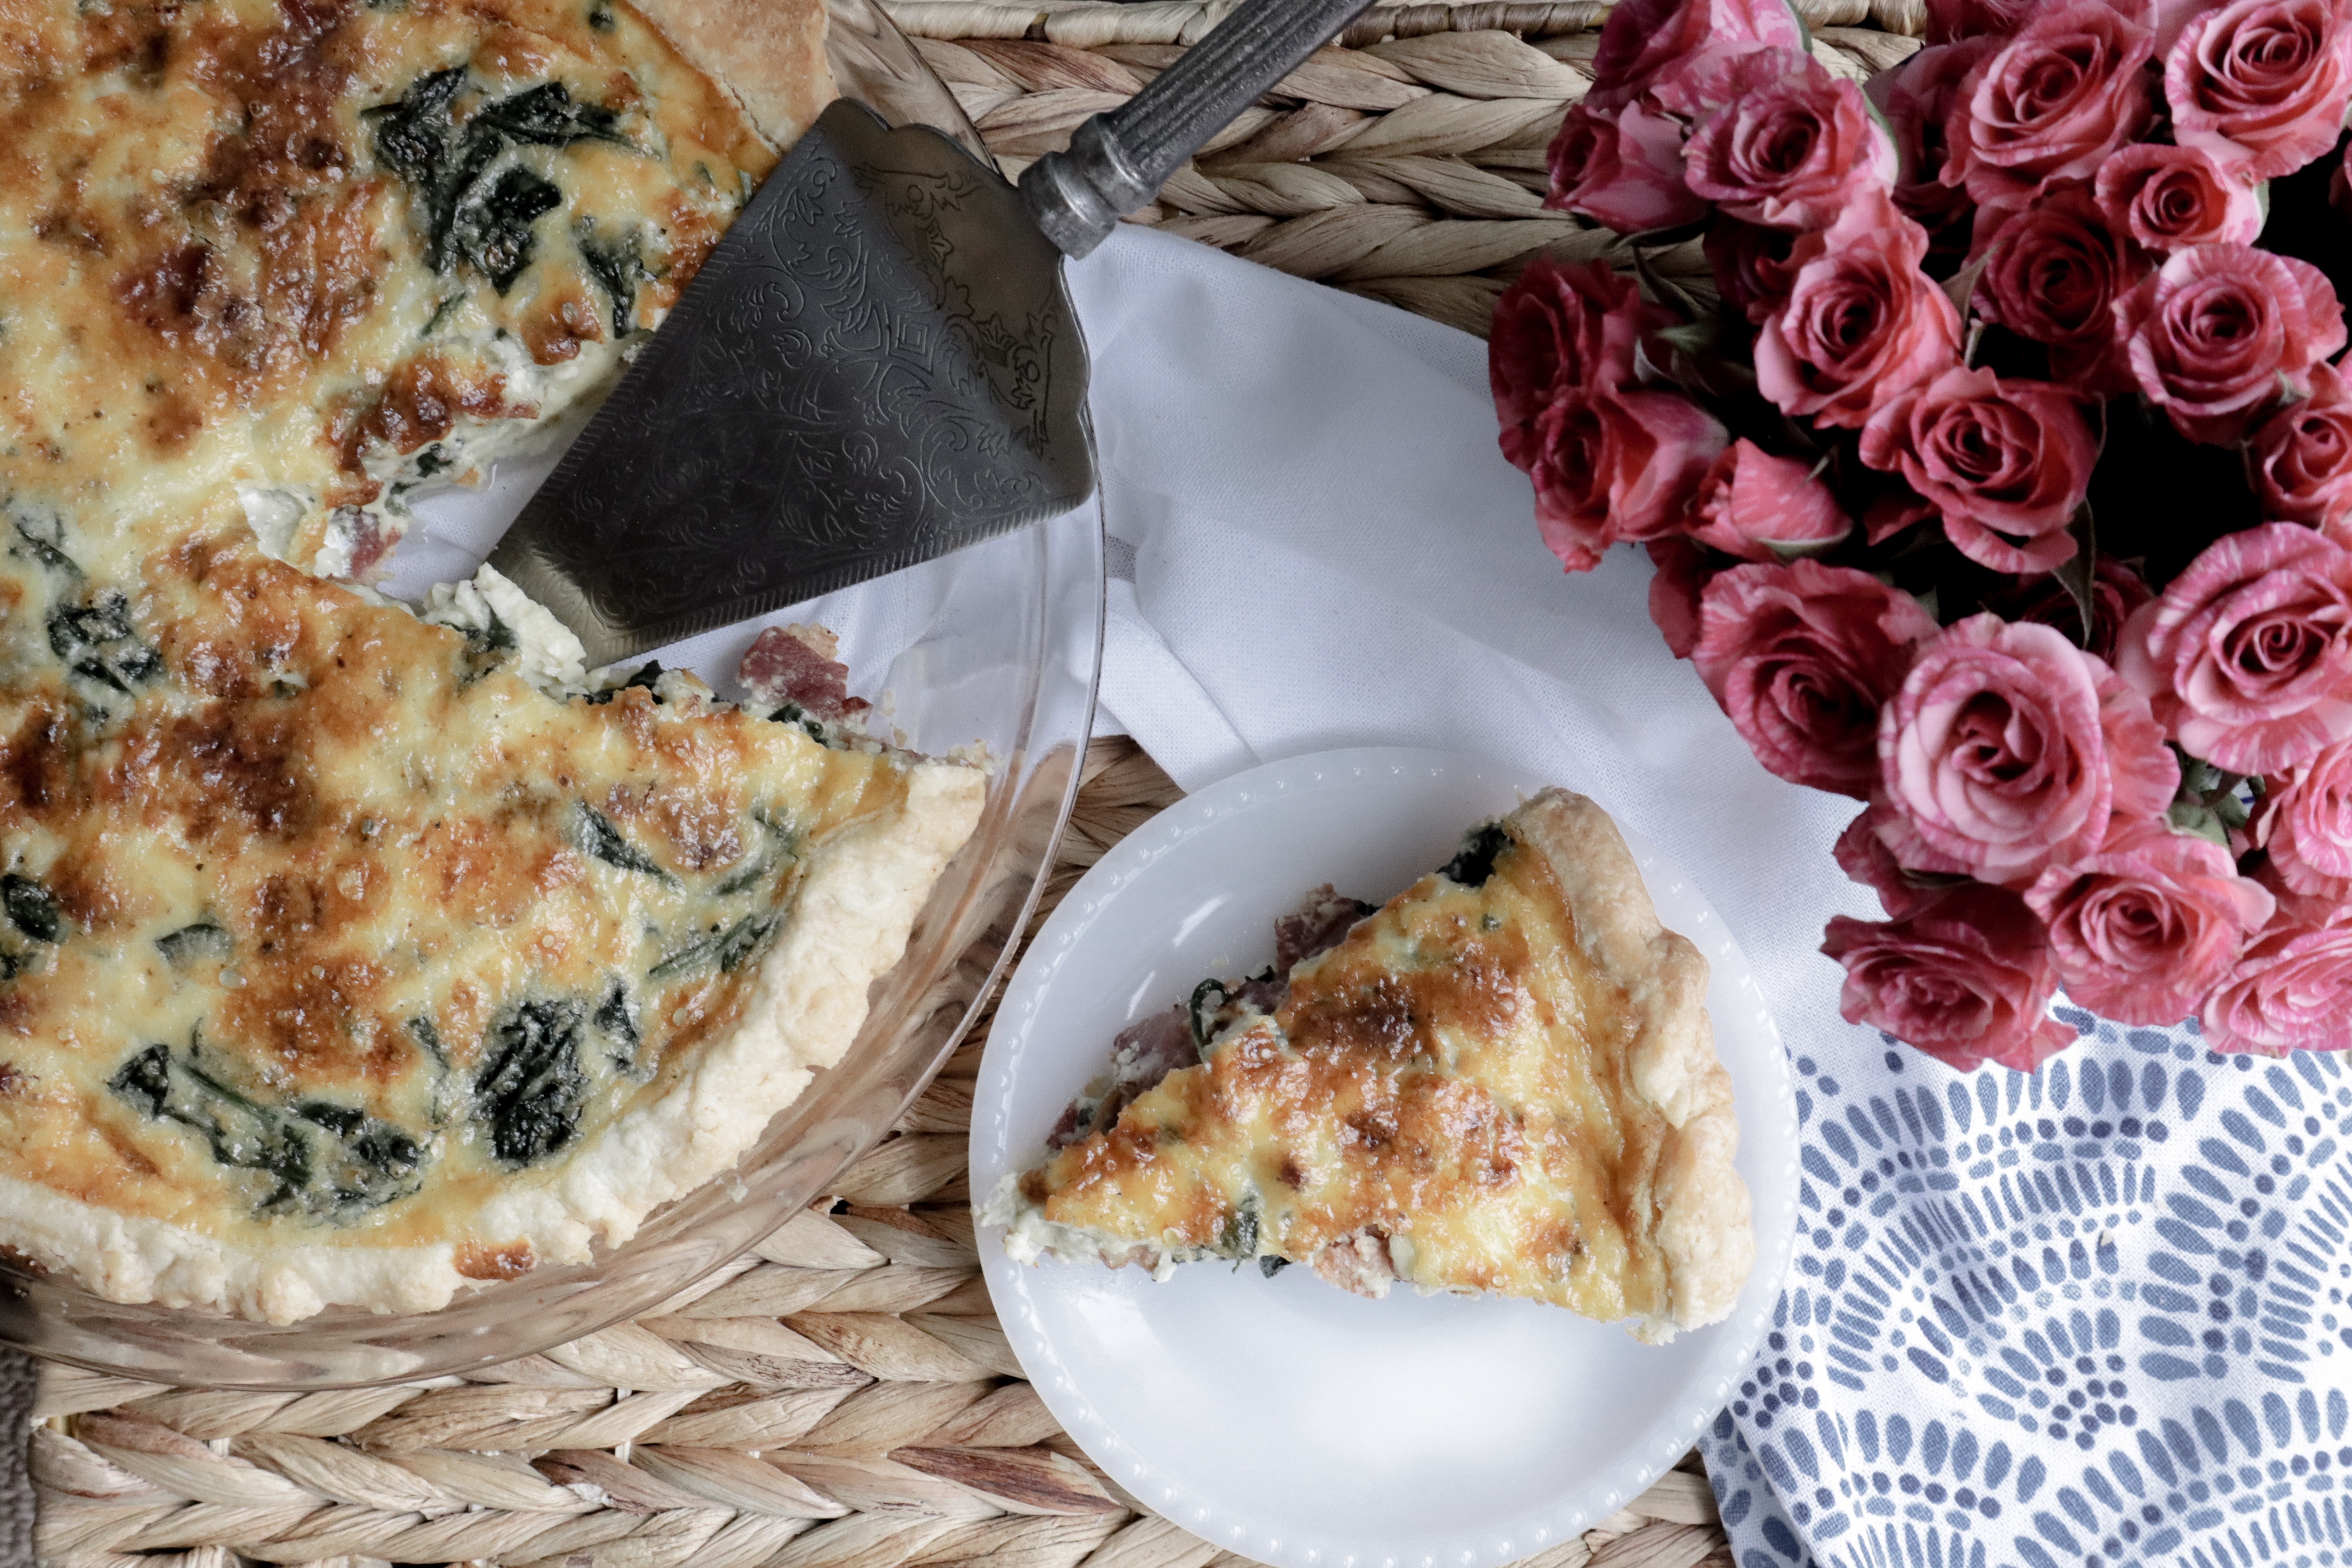 Spring Planting and Mud Season with Oakhurst Chocolate Milk with Spinach Bacon and Blue Cheese Quiche Recipe - From the Family